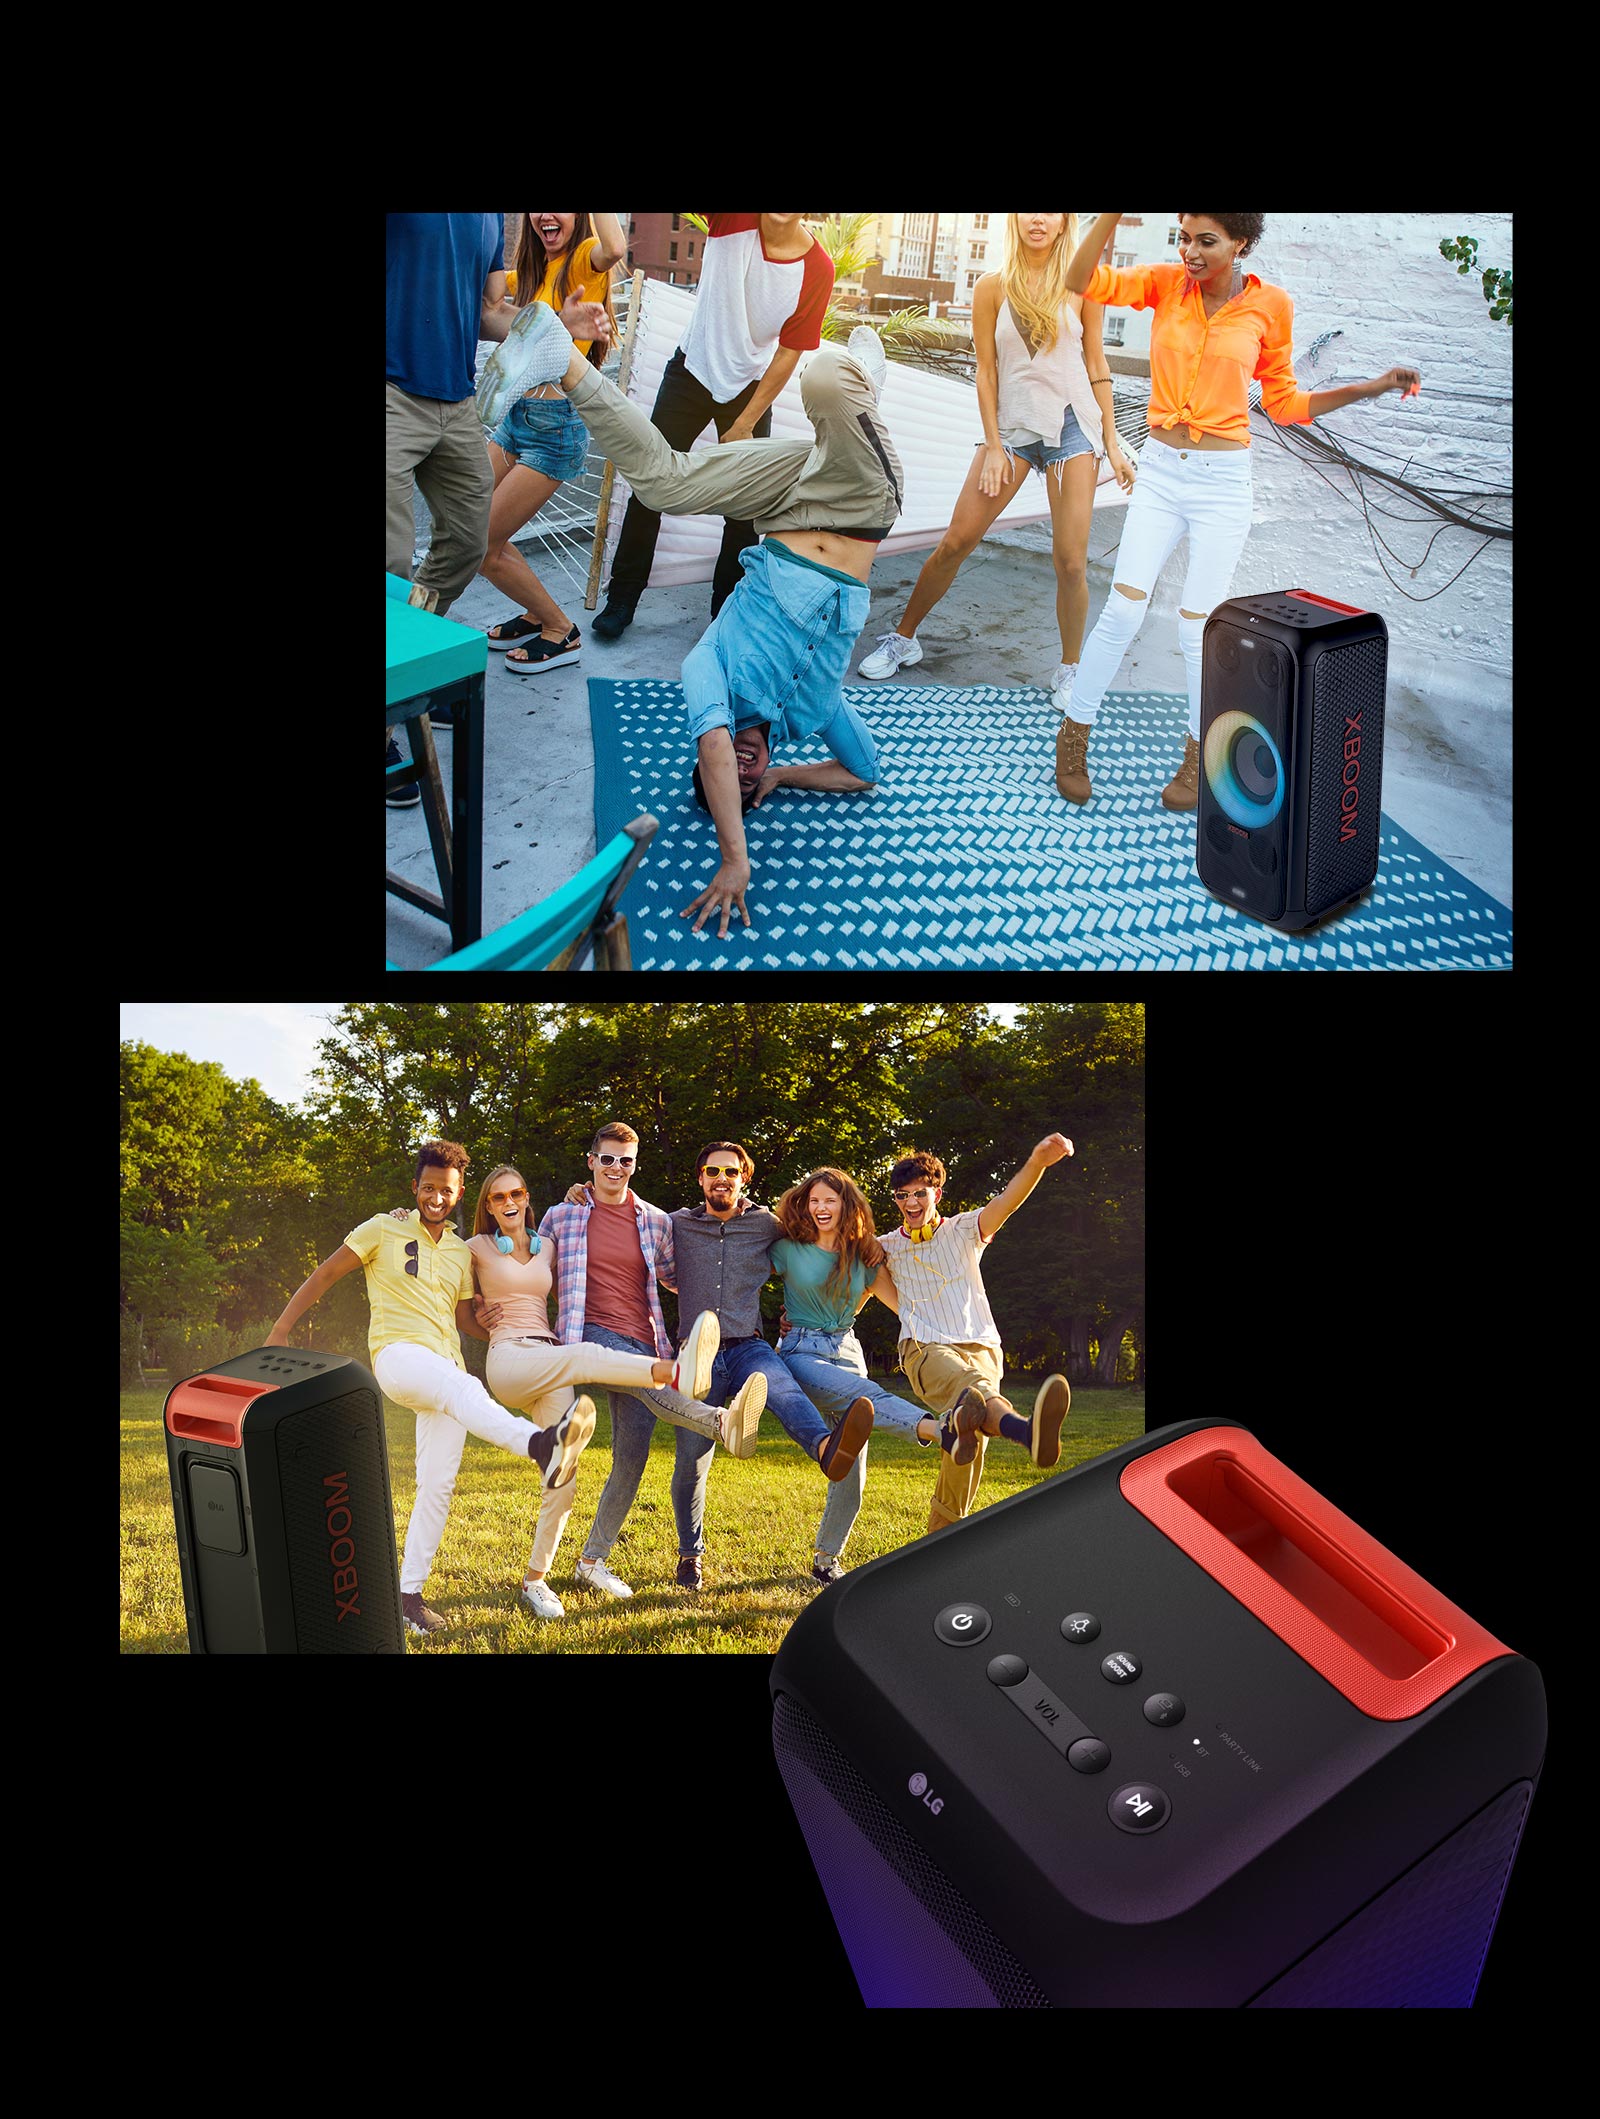 From top to bottom: There are some people dancing around the speaker. In the park, a group of people enjoying music with the speaker. The last image shows the close up of the product's top.